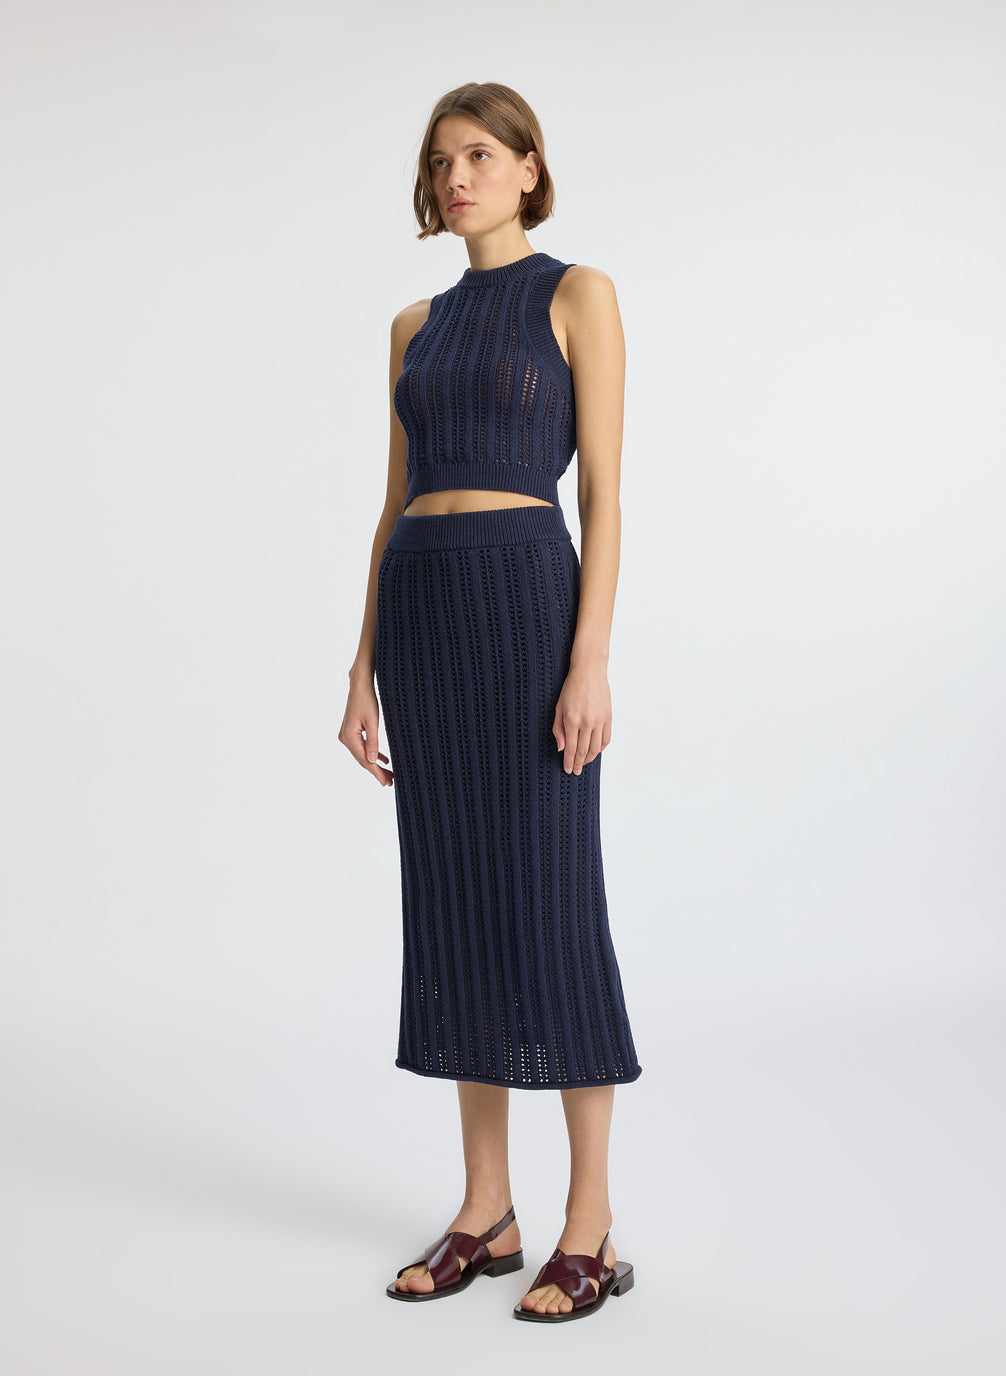 side view of woman wearing navy blue open weave tank top and matching skirt